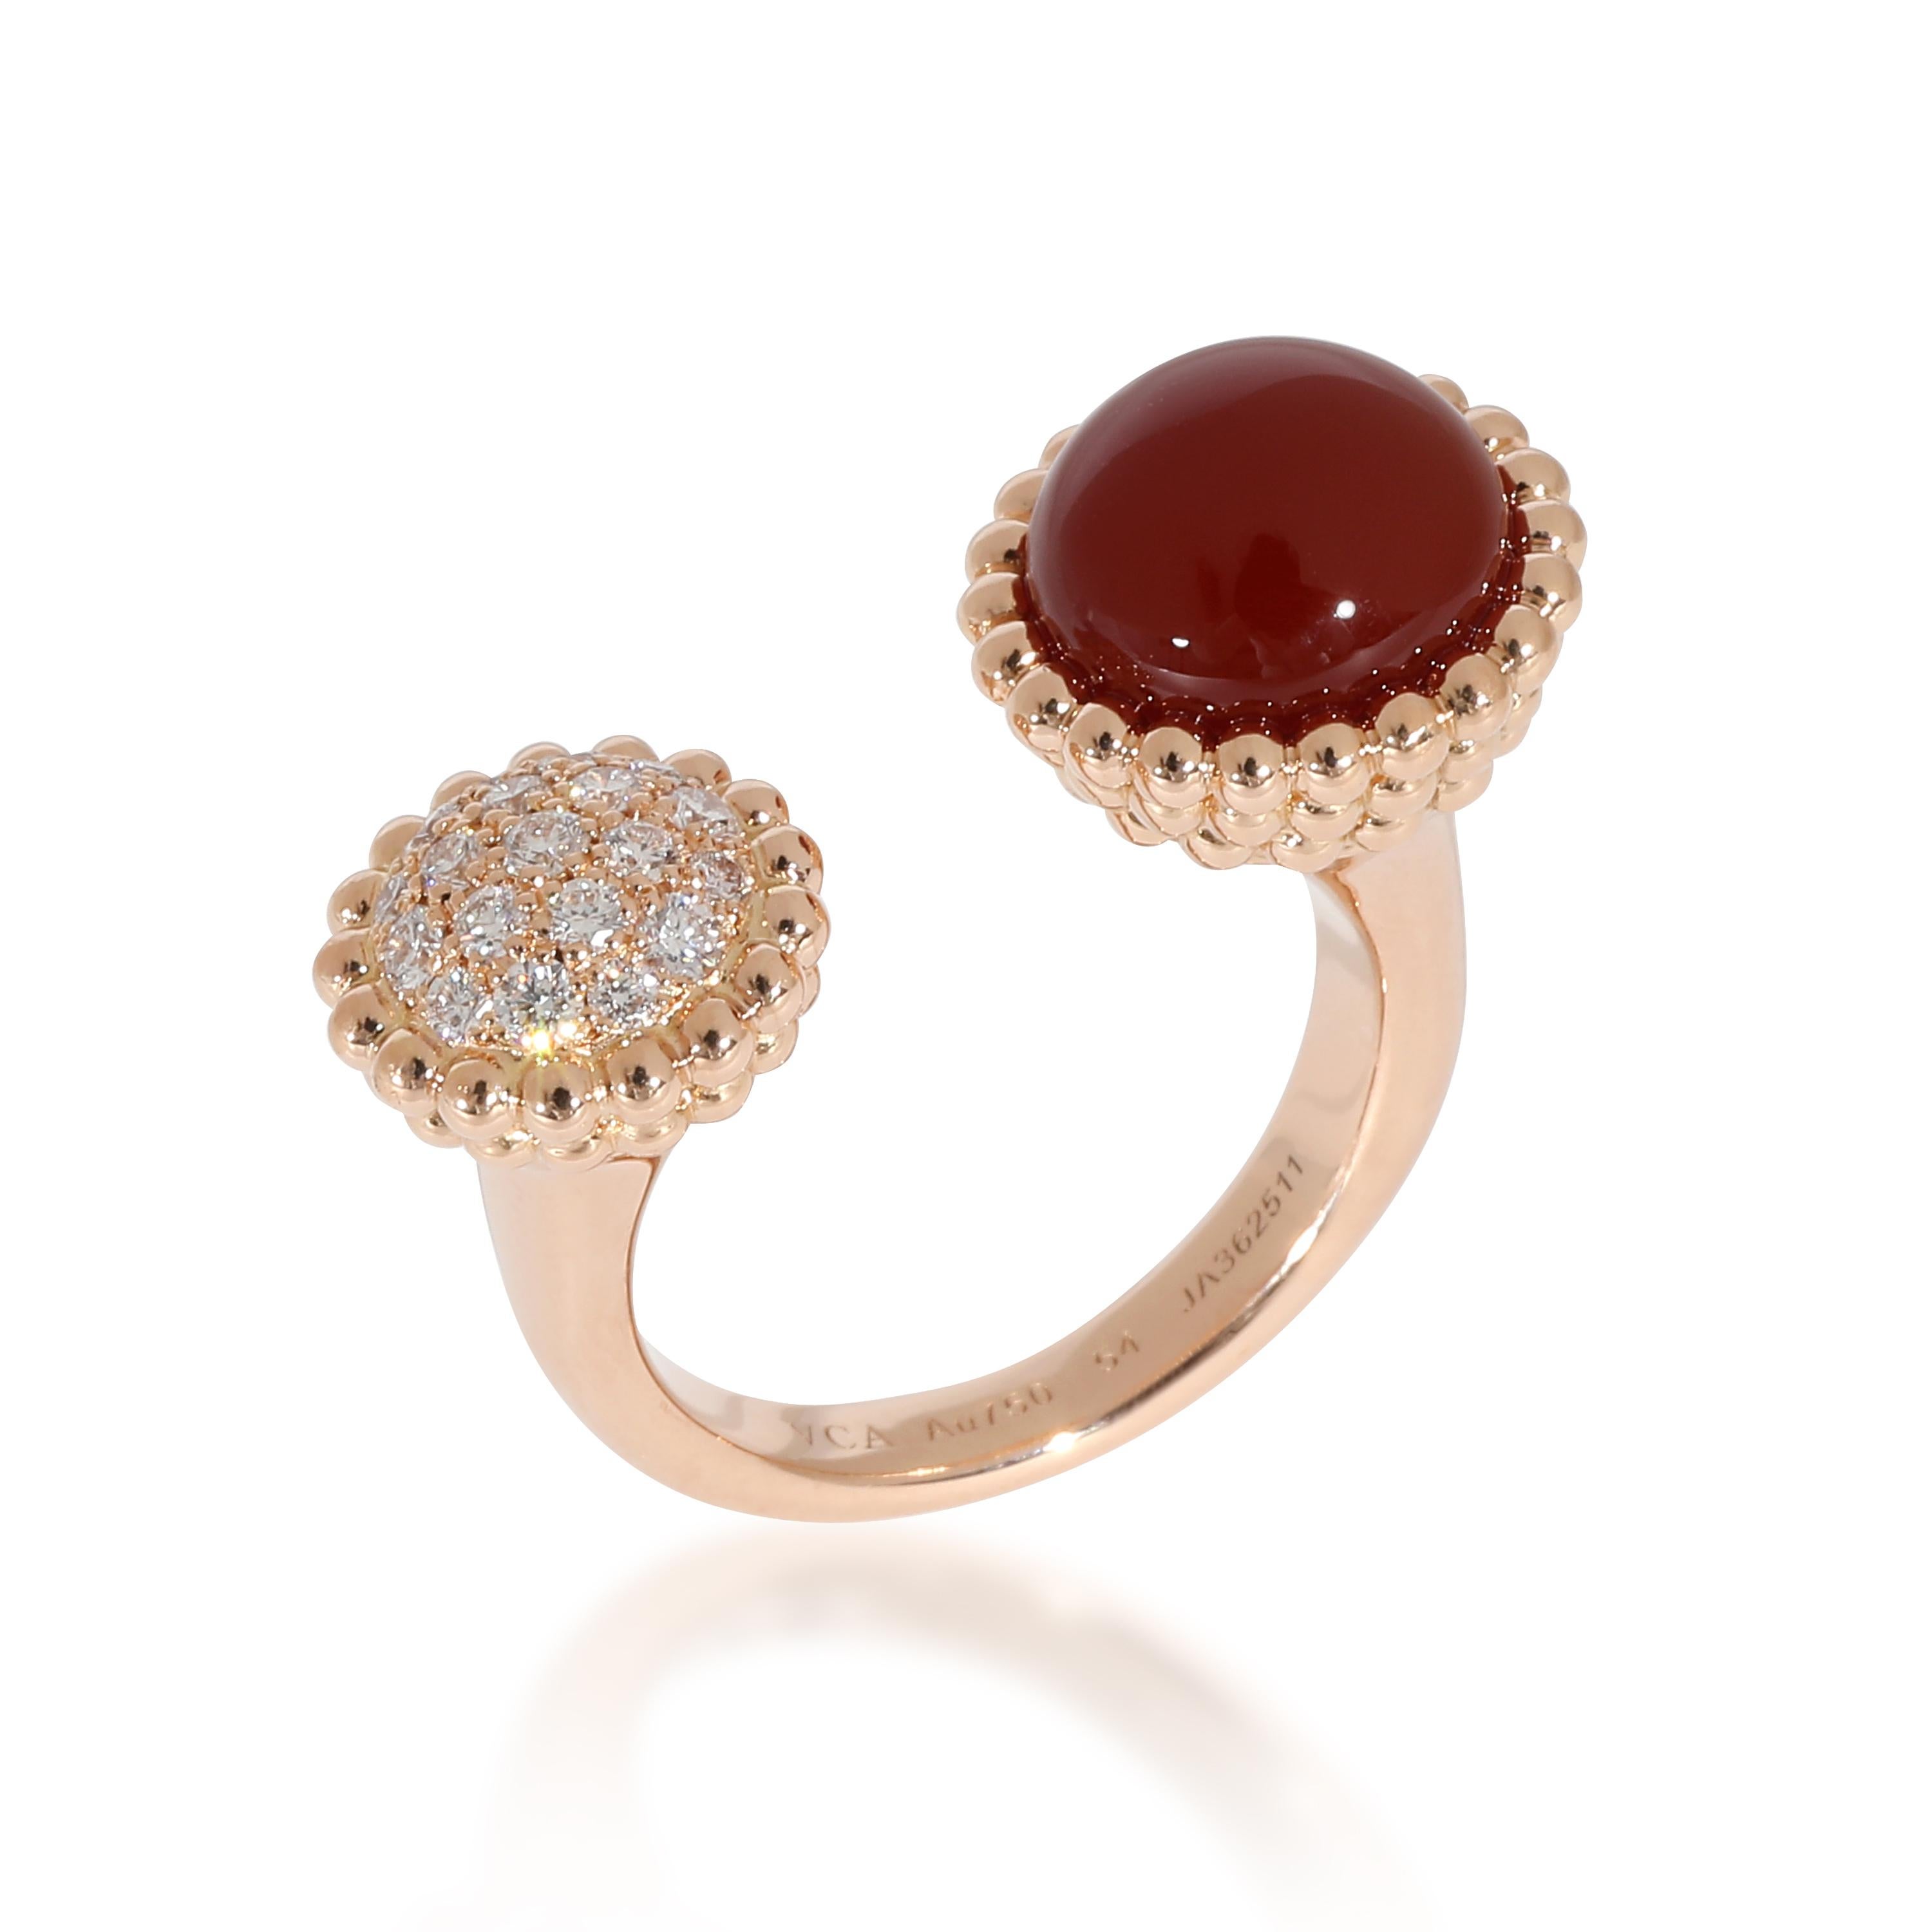 Van Cleef & Arpels Perlee Between The Finger Ring With Carnelian & Diamonds 0.35 In Excellent Condition For Sale In New York, NY